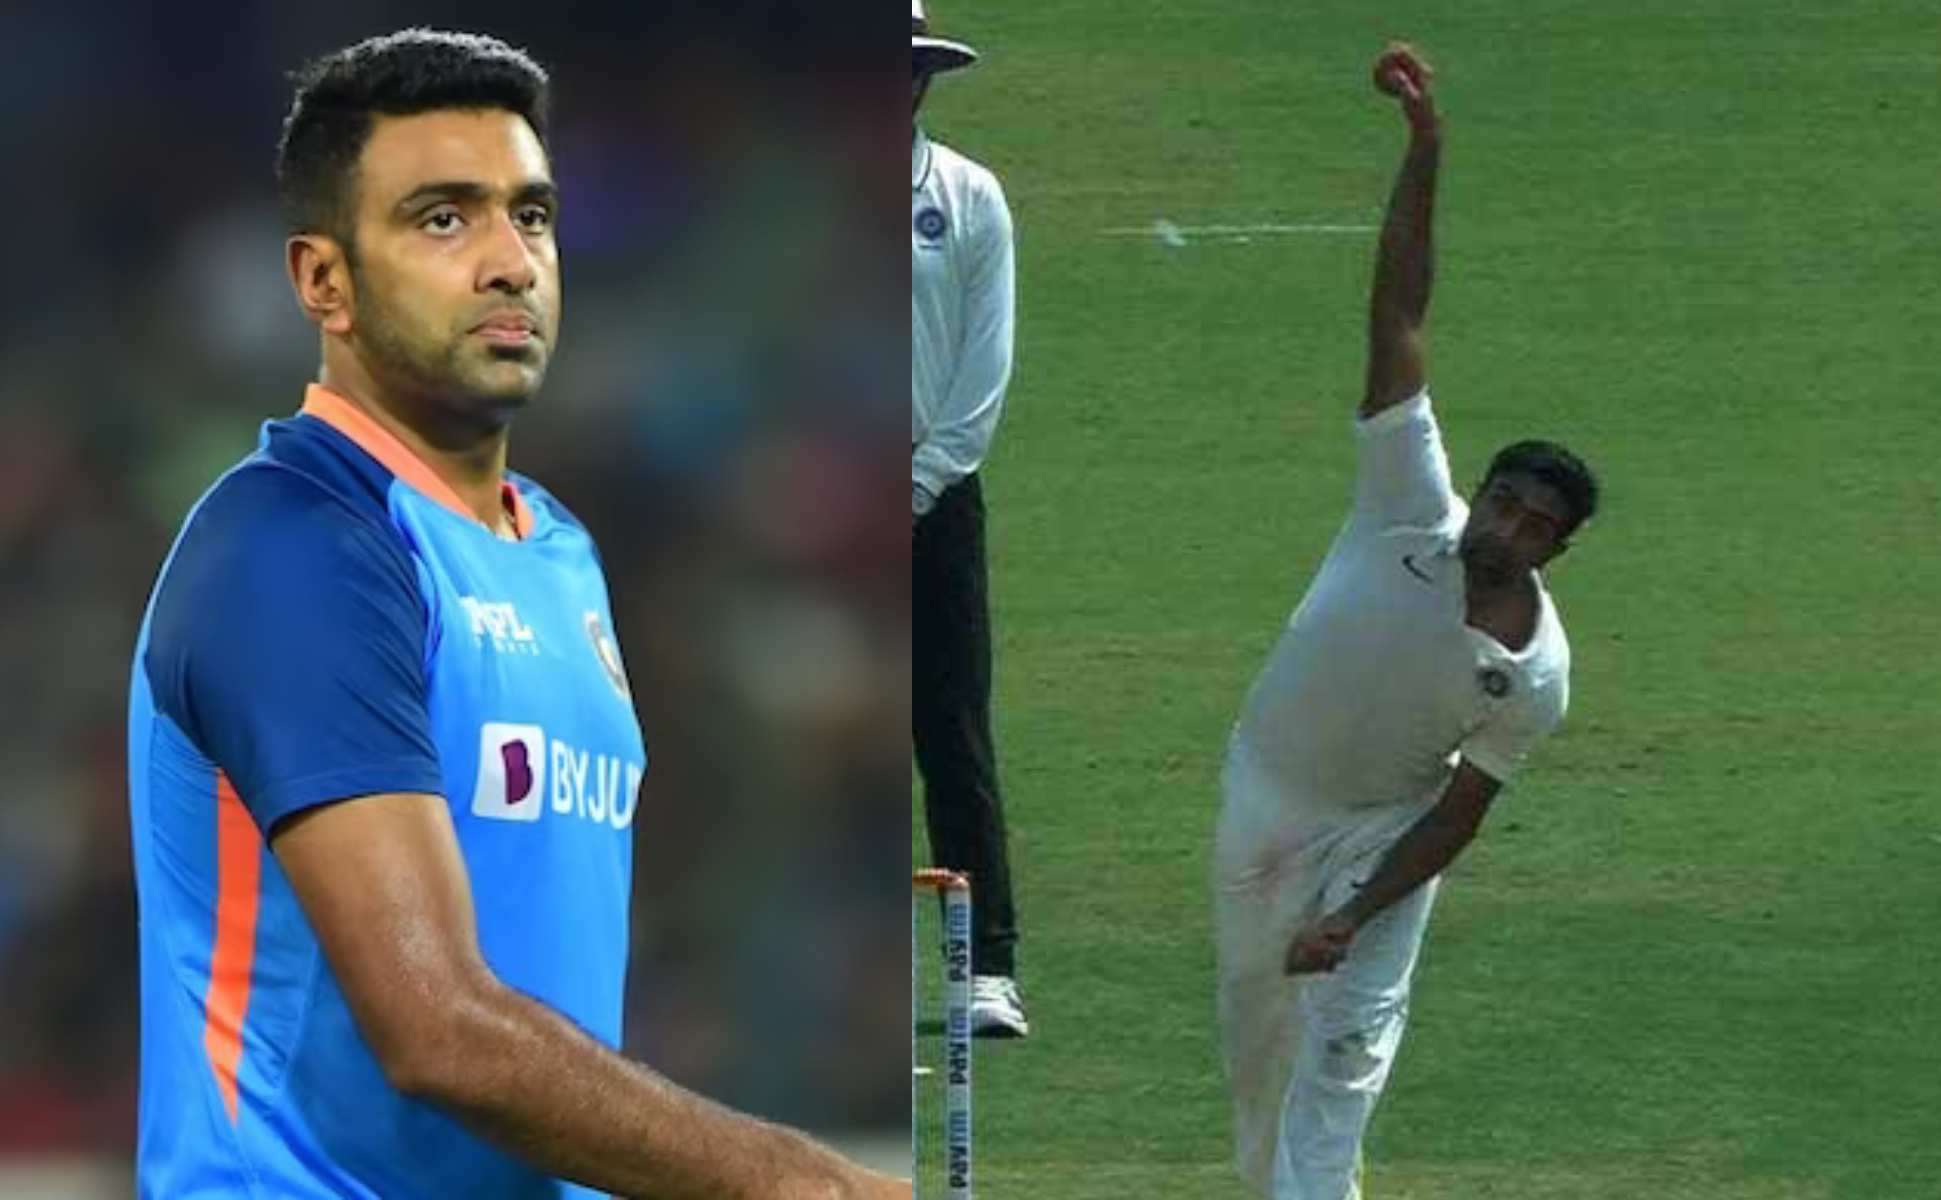 Ashwin is known to experiment with leg-spin as well | Twitter